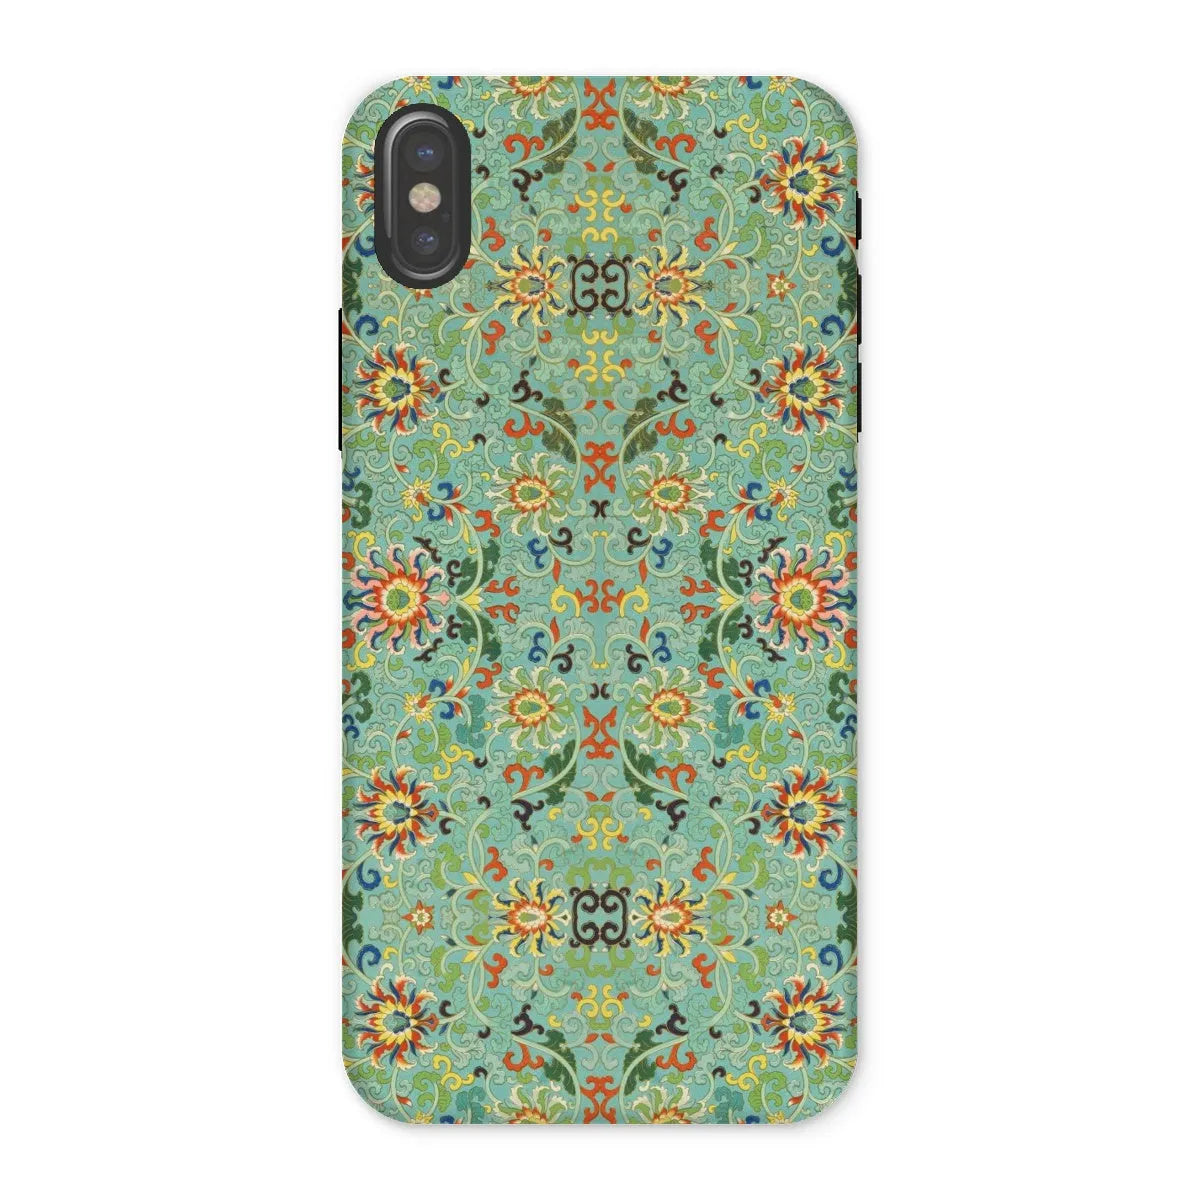 Lotus Candy - Chinese Aesthetic Pattern Art Phone Case - Iphone x / Matte - Mobile Phone Cases - Aesthetic Art